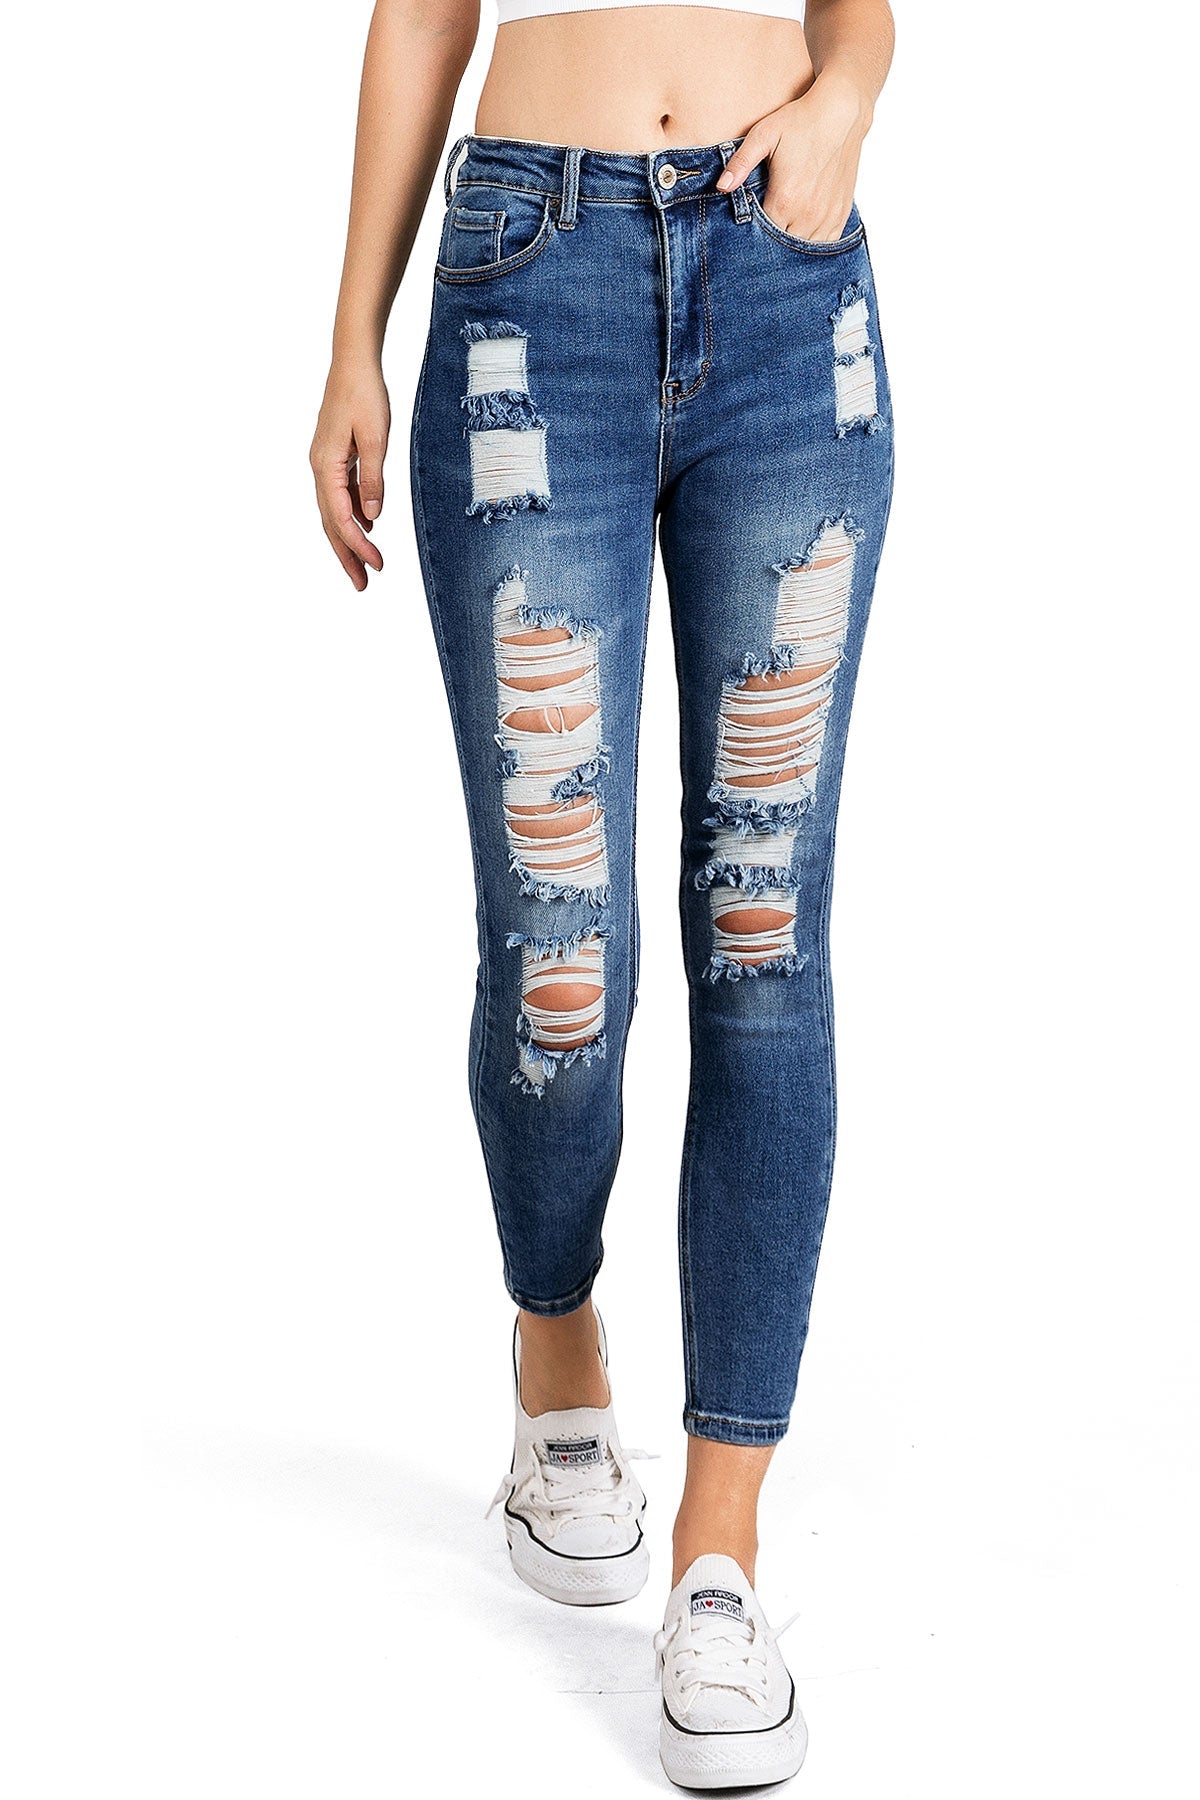 Halo Ripped Skinny Jeans